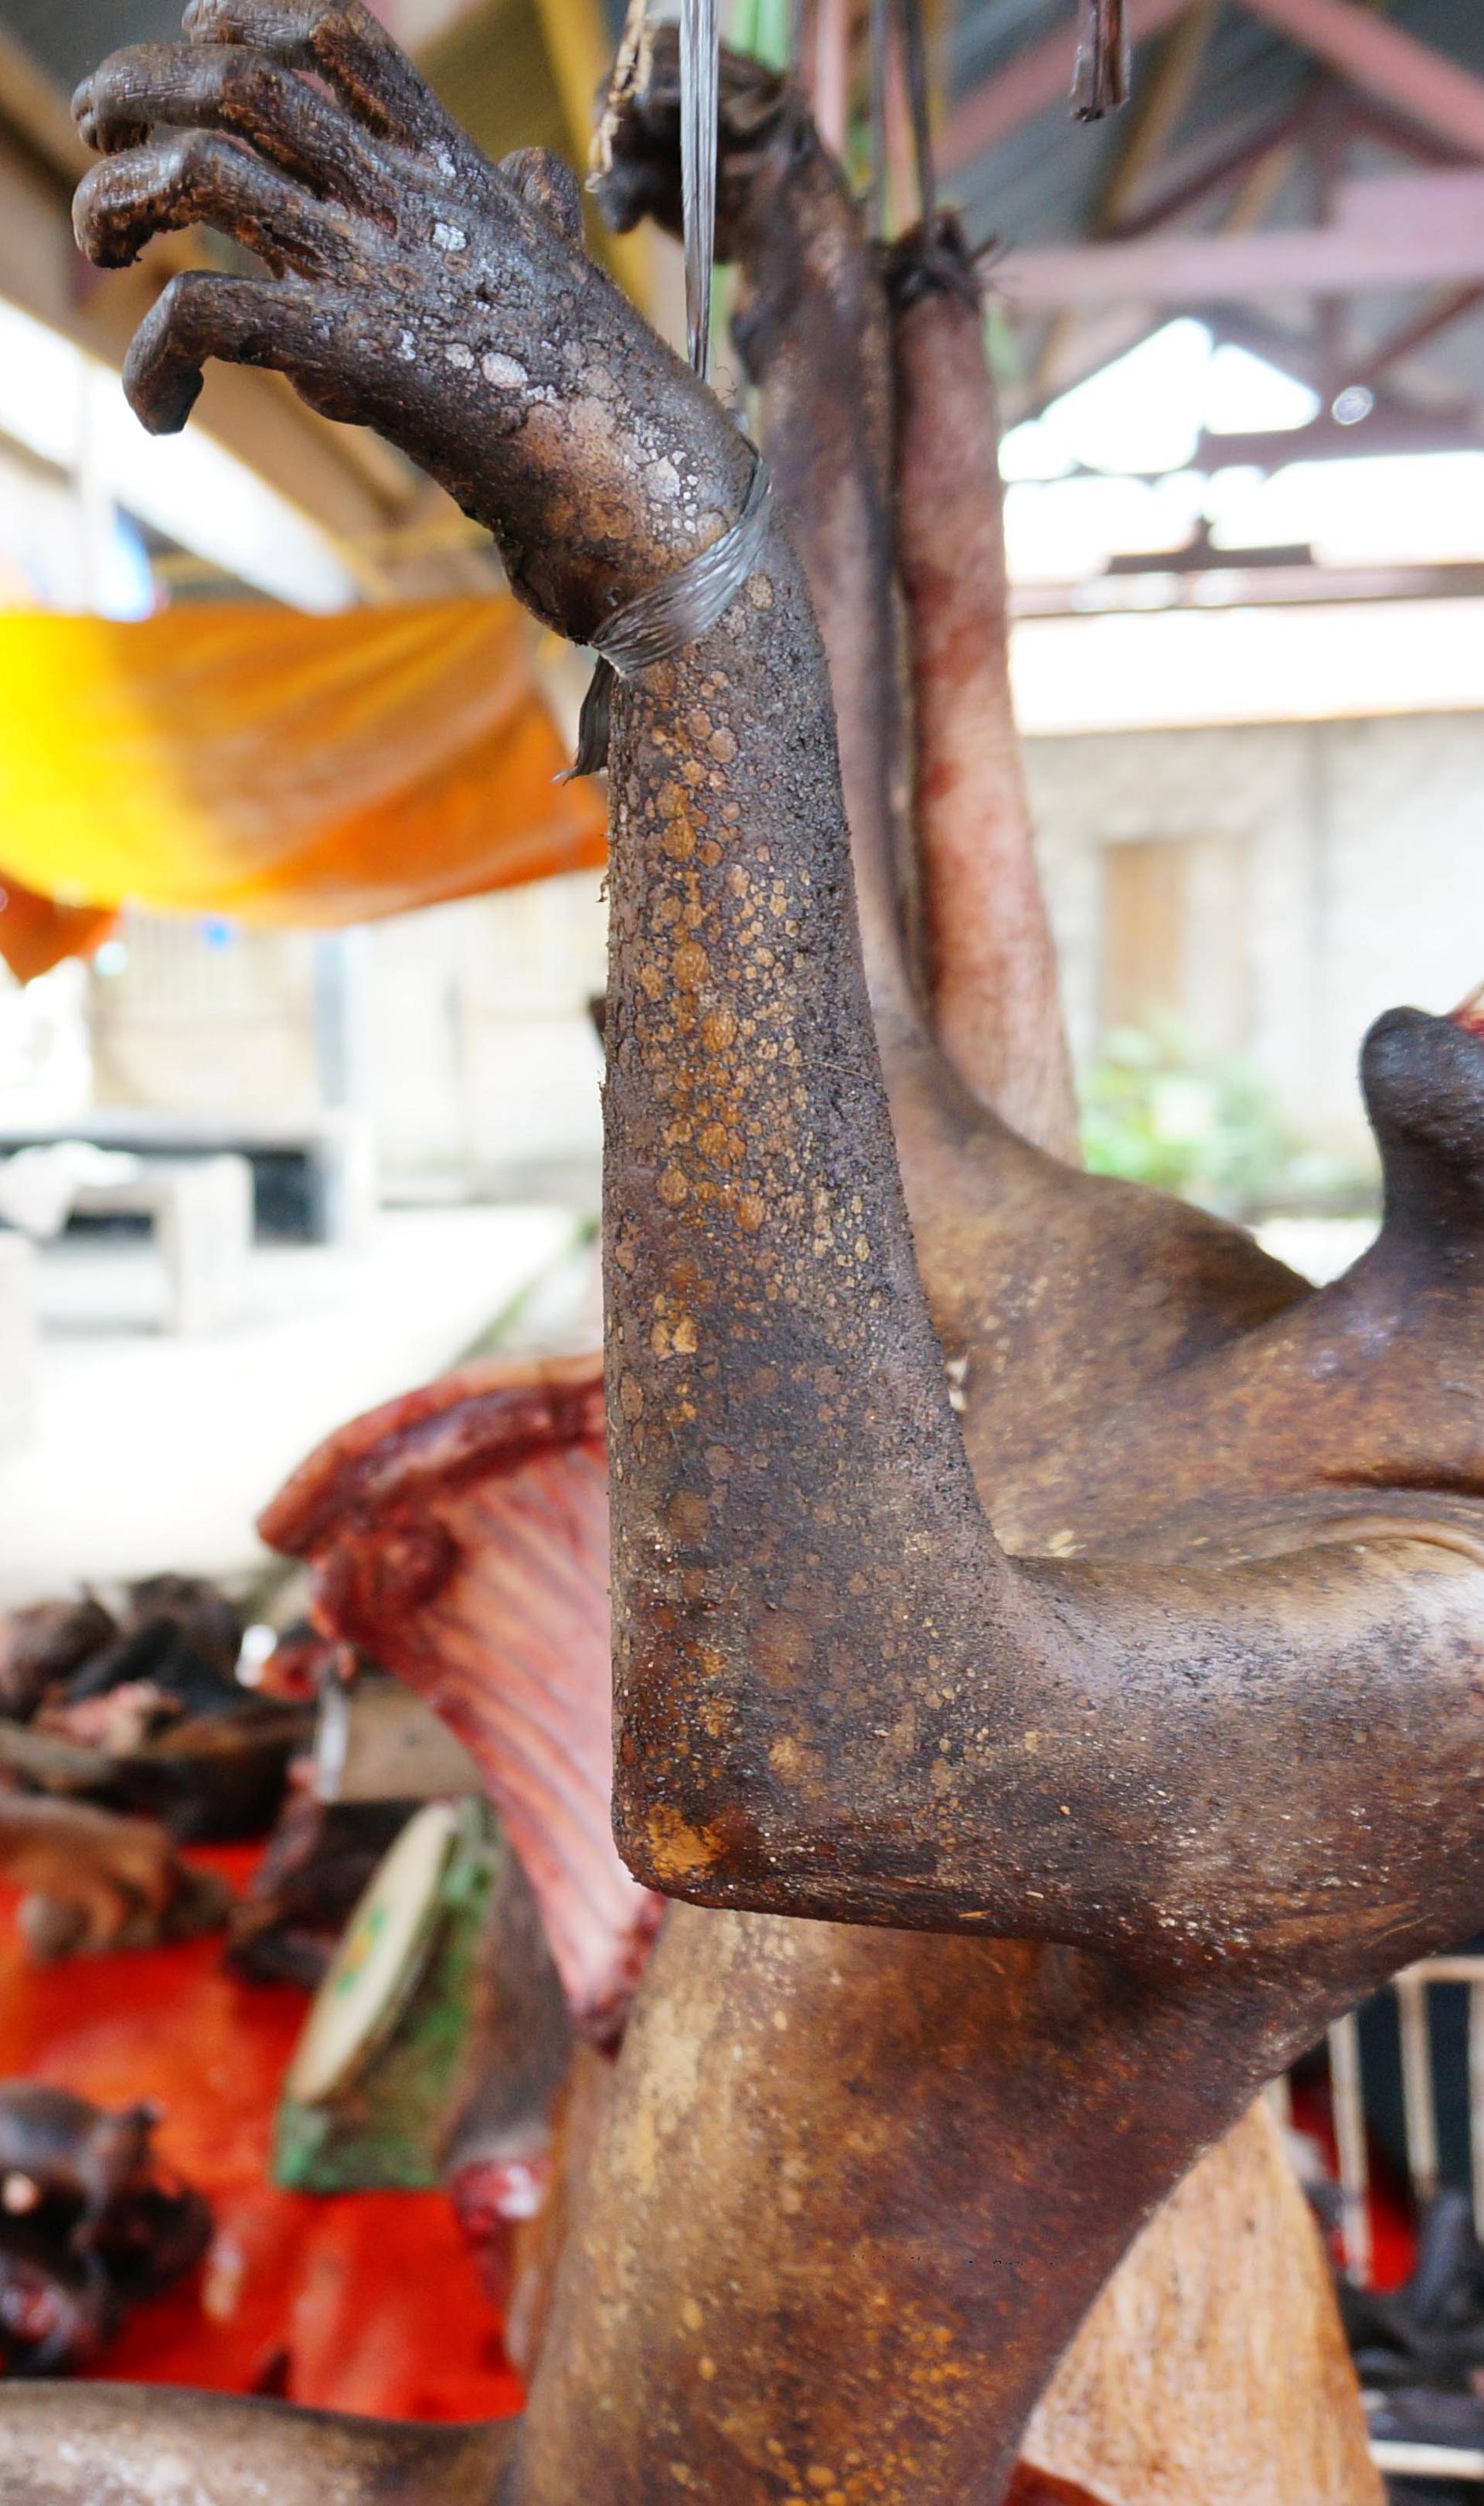 Endangered Animal Meat On Sale In Indonesia